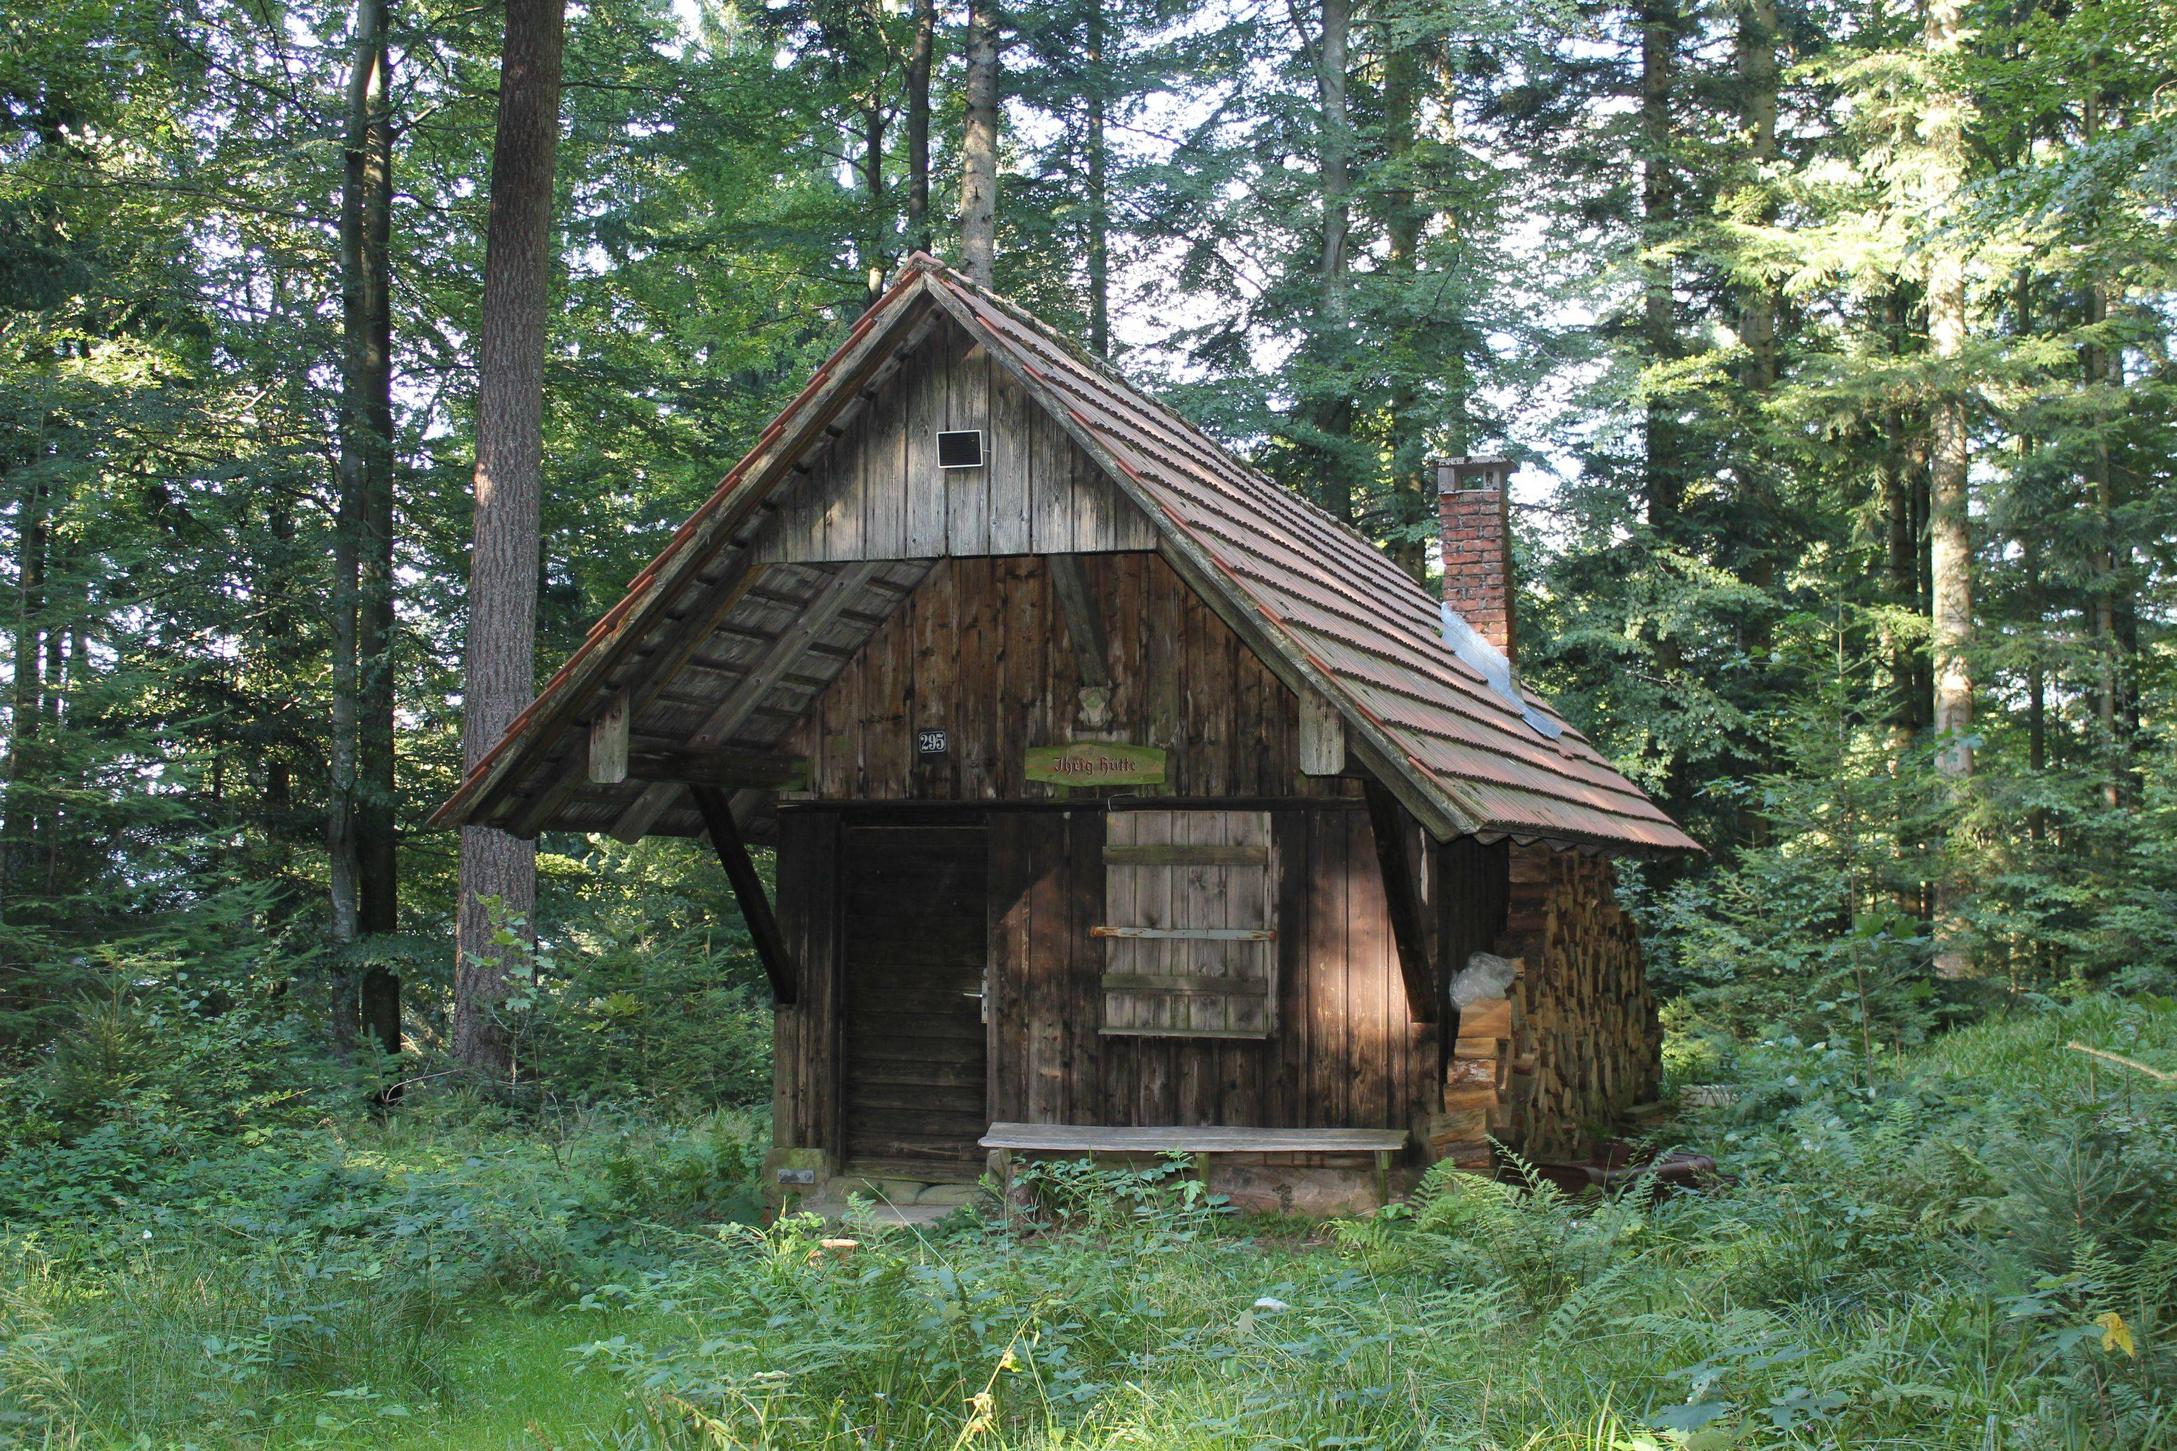 Little wooden cabin surrounded by trees in the Blackforest, Germany ...